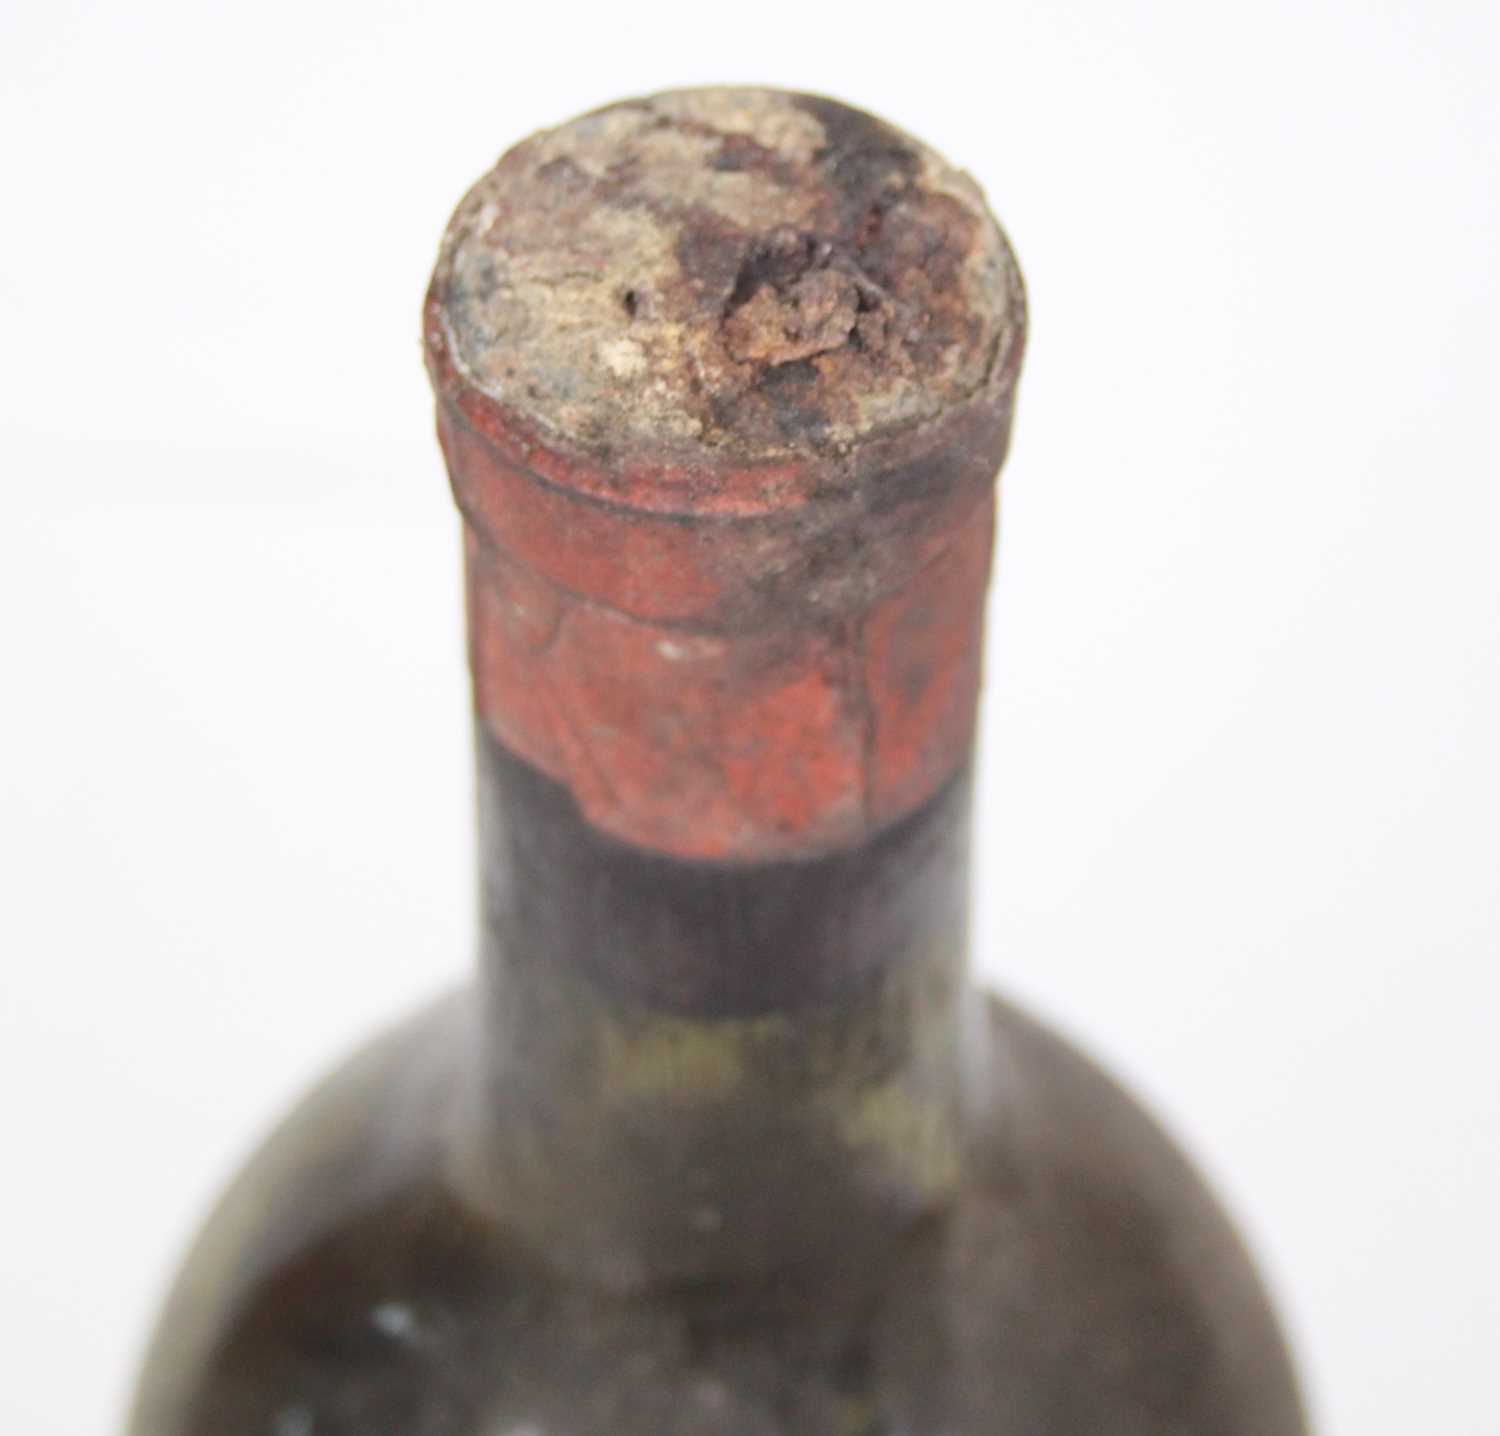 Château Mouton Rothschild Pauillac, vintage unknown, but probably pre-war, label badly damaged and - Image 3 of 3